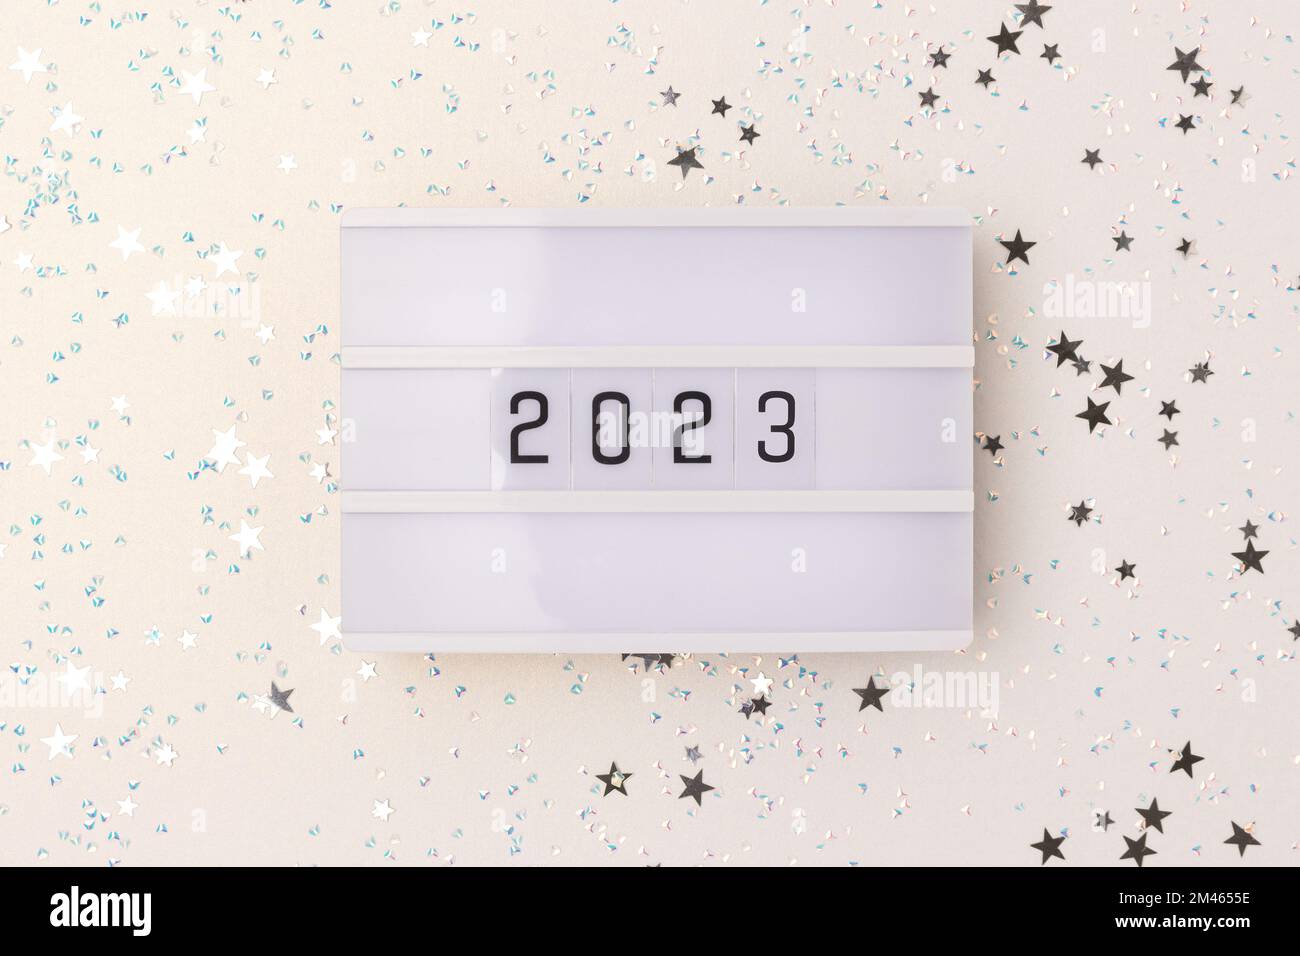 Lightbox with 2023 numbers and stars confetti scattered on a silver glittering background. New Year glowing concept. Stock Photo